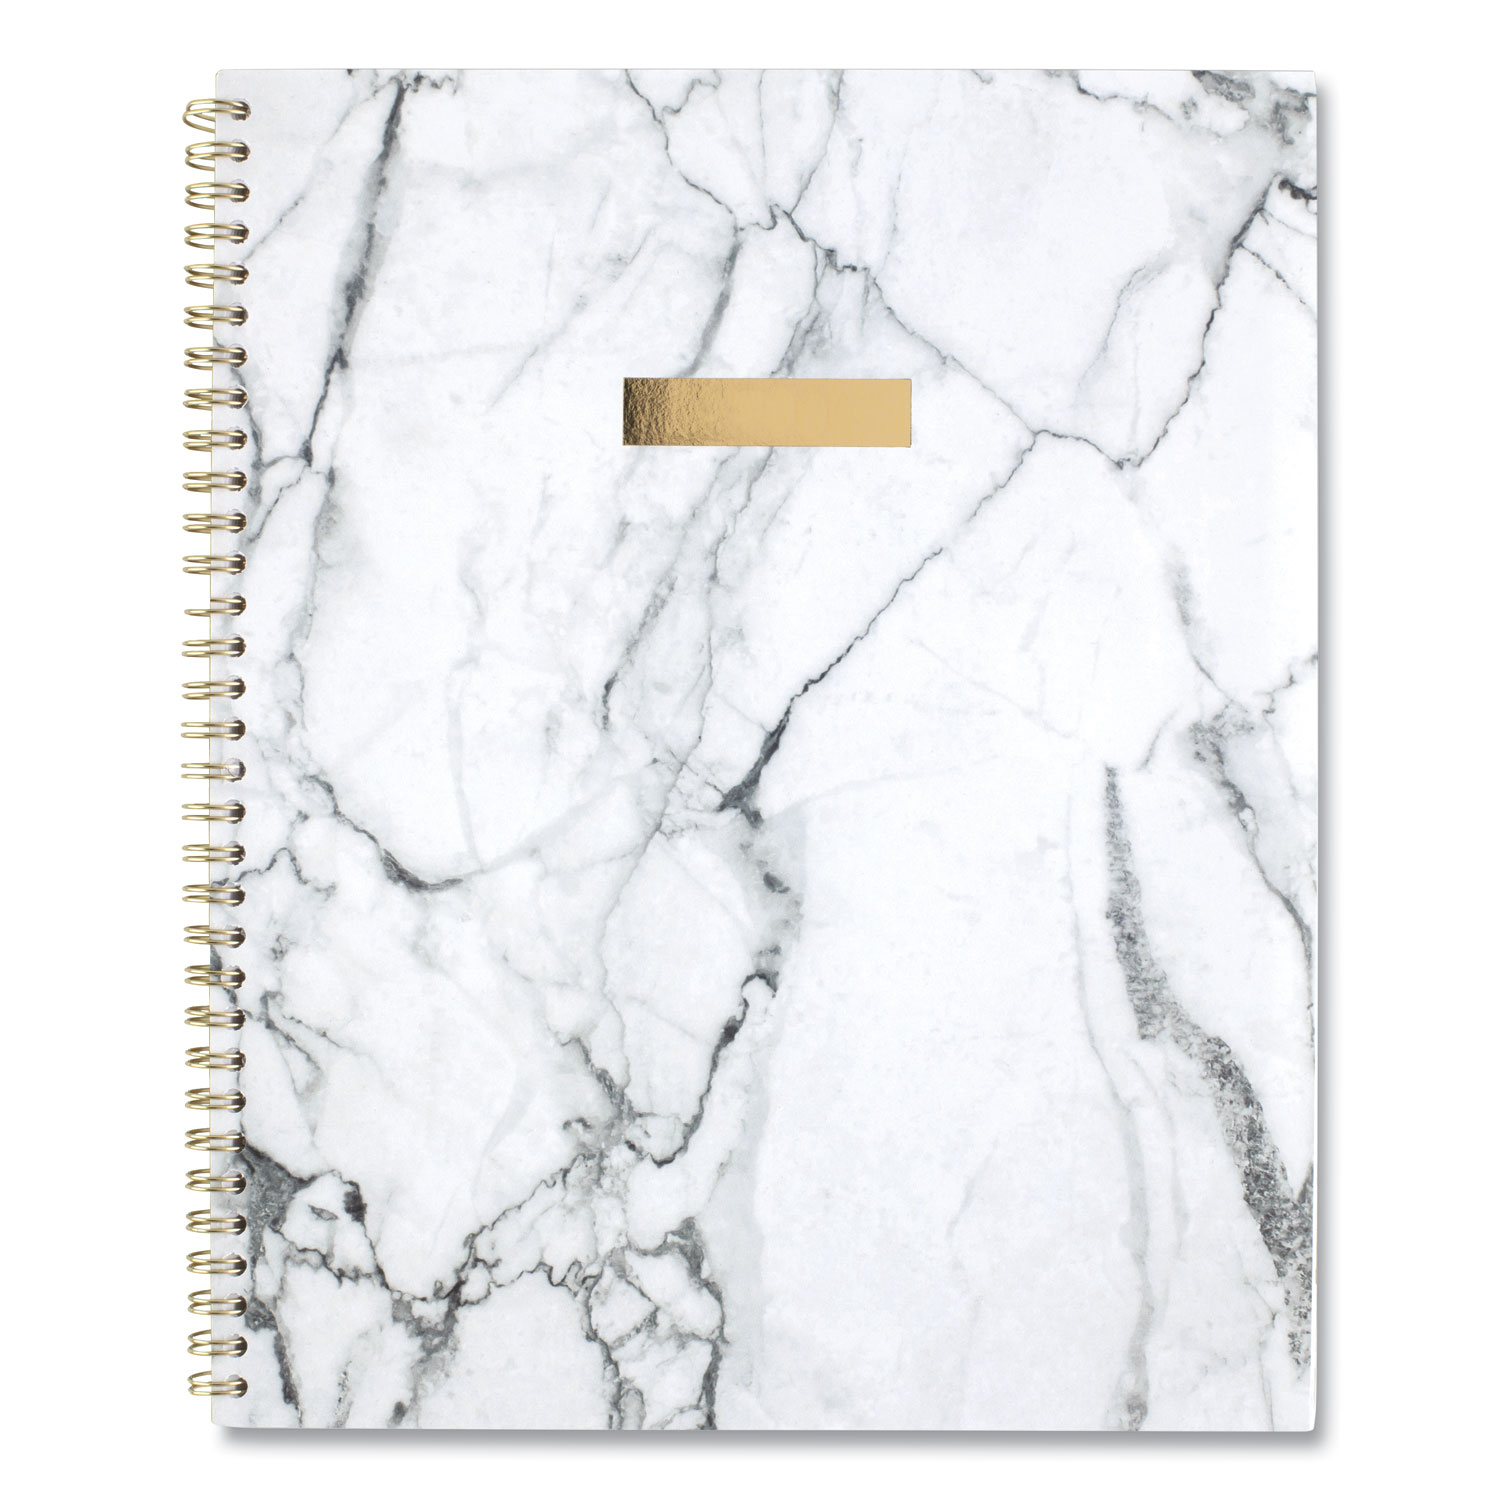  Cambridge 1461905 Bianca Weekly/Monthly Planner, 11 x 8.5, Gray Marbled, 2021 (AAG1461905) 